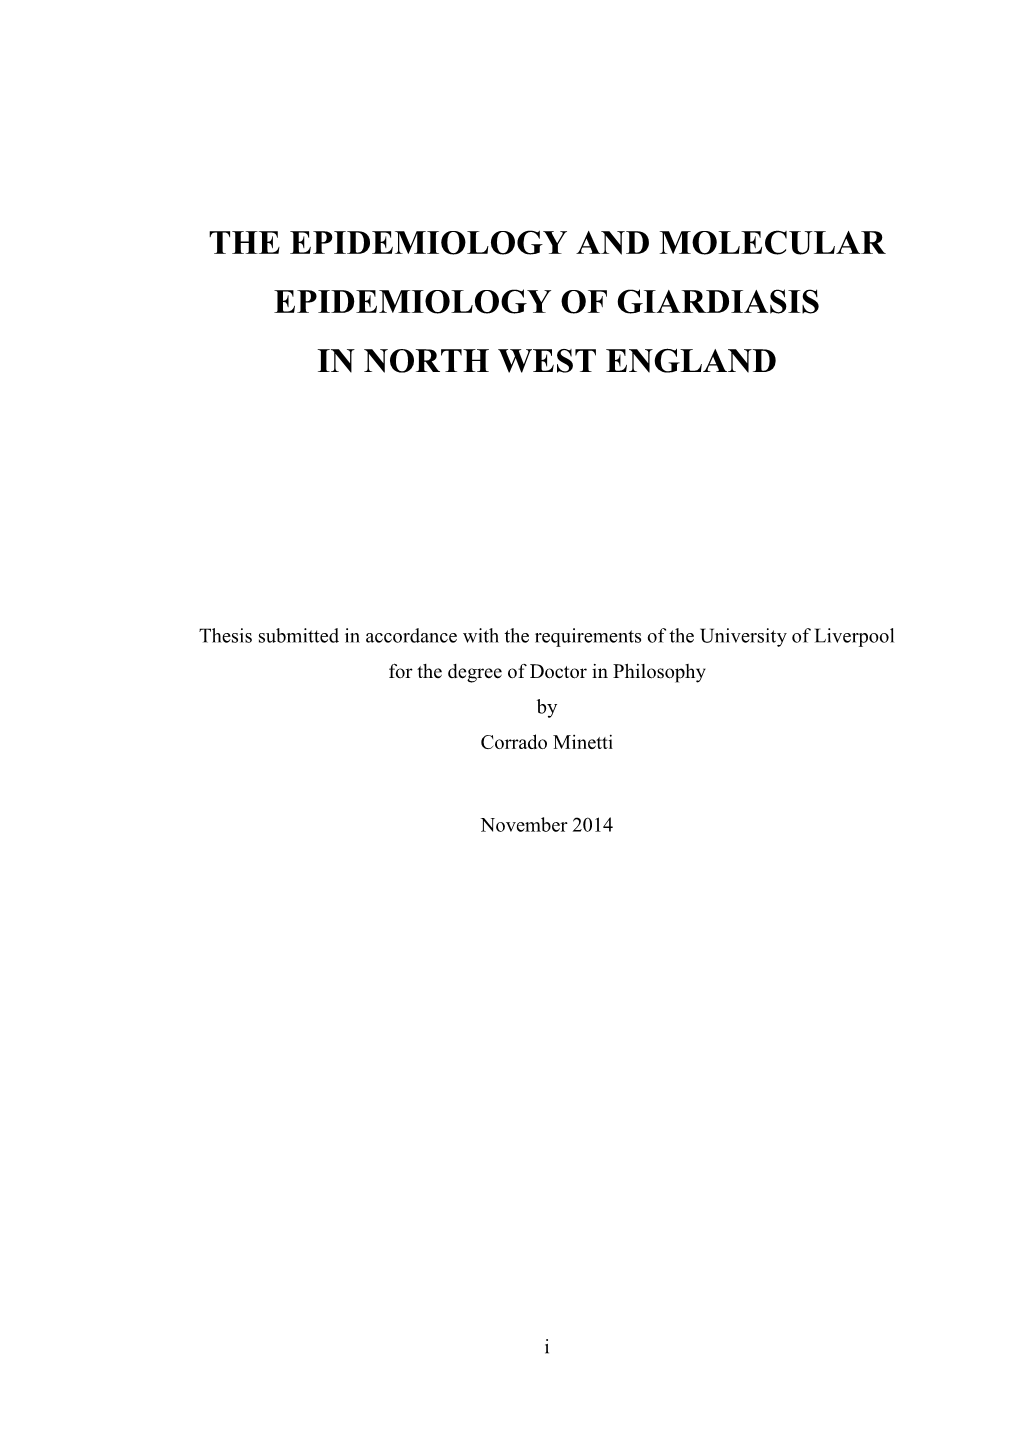 The Epidemiology and Molecular Epidemiology of Giardiasis in North West England